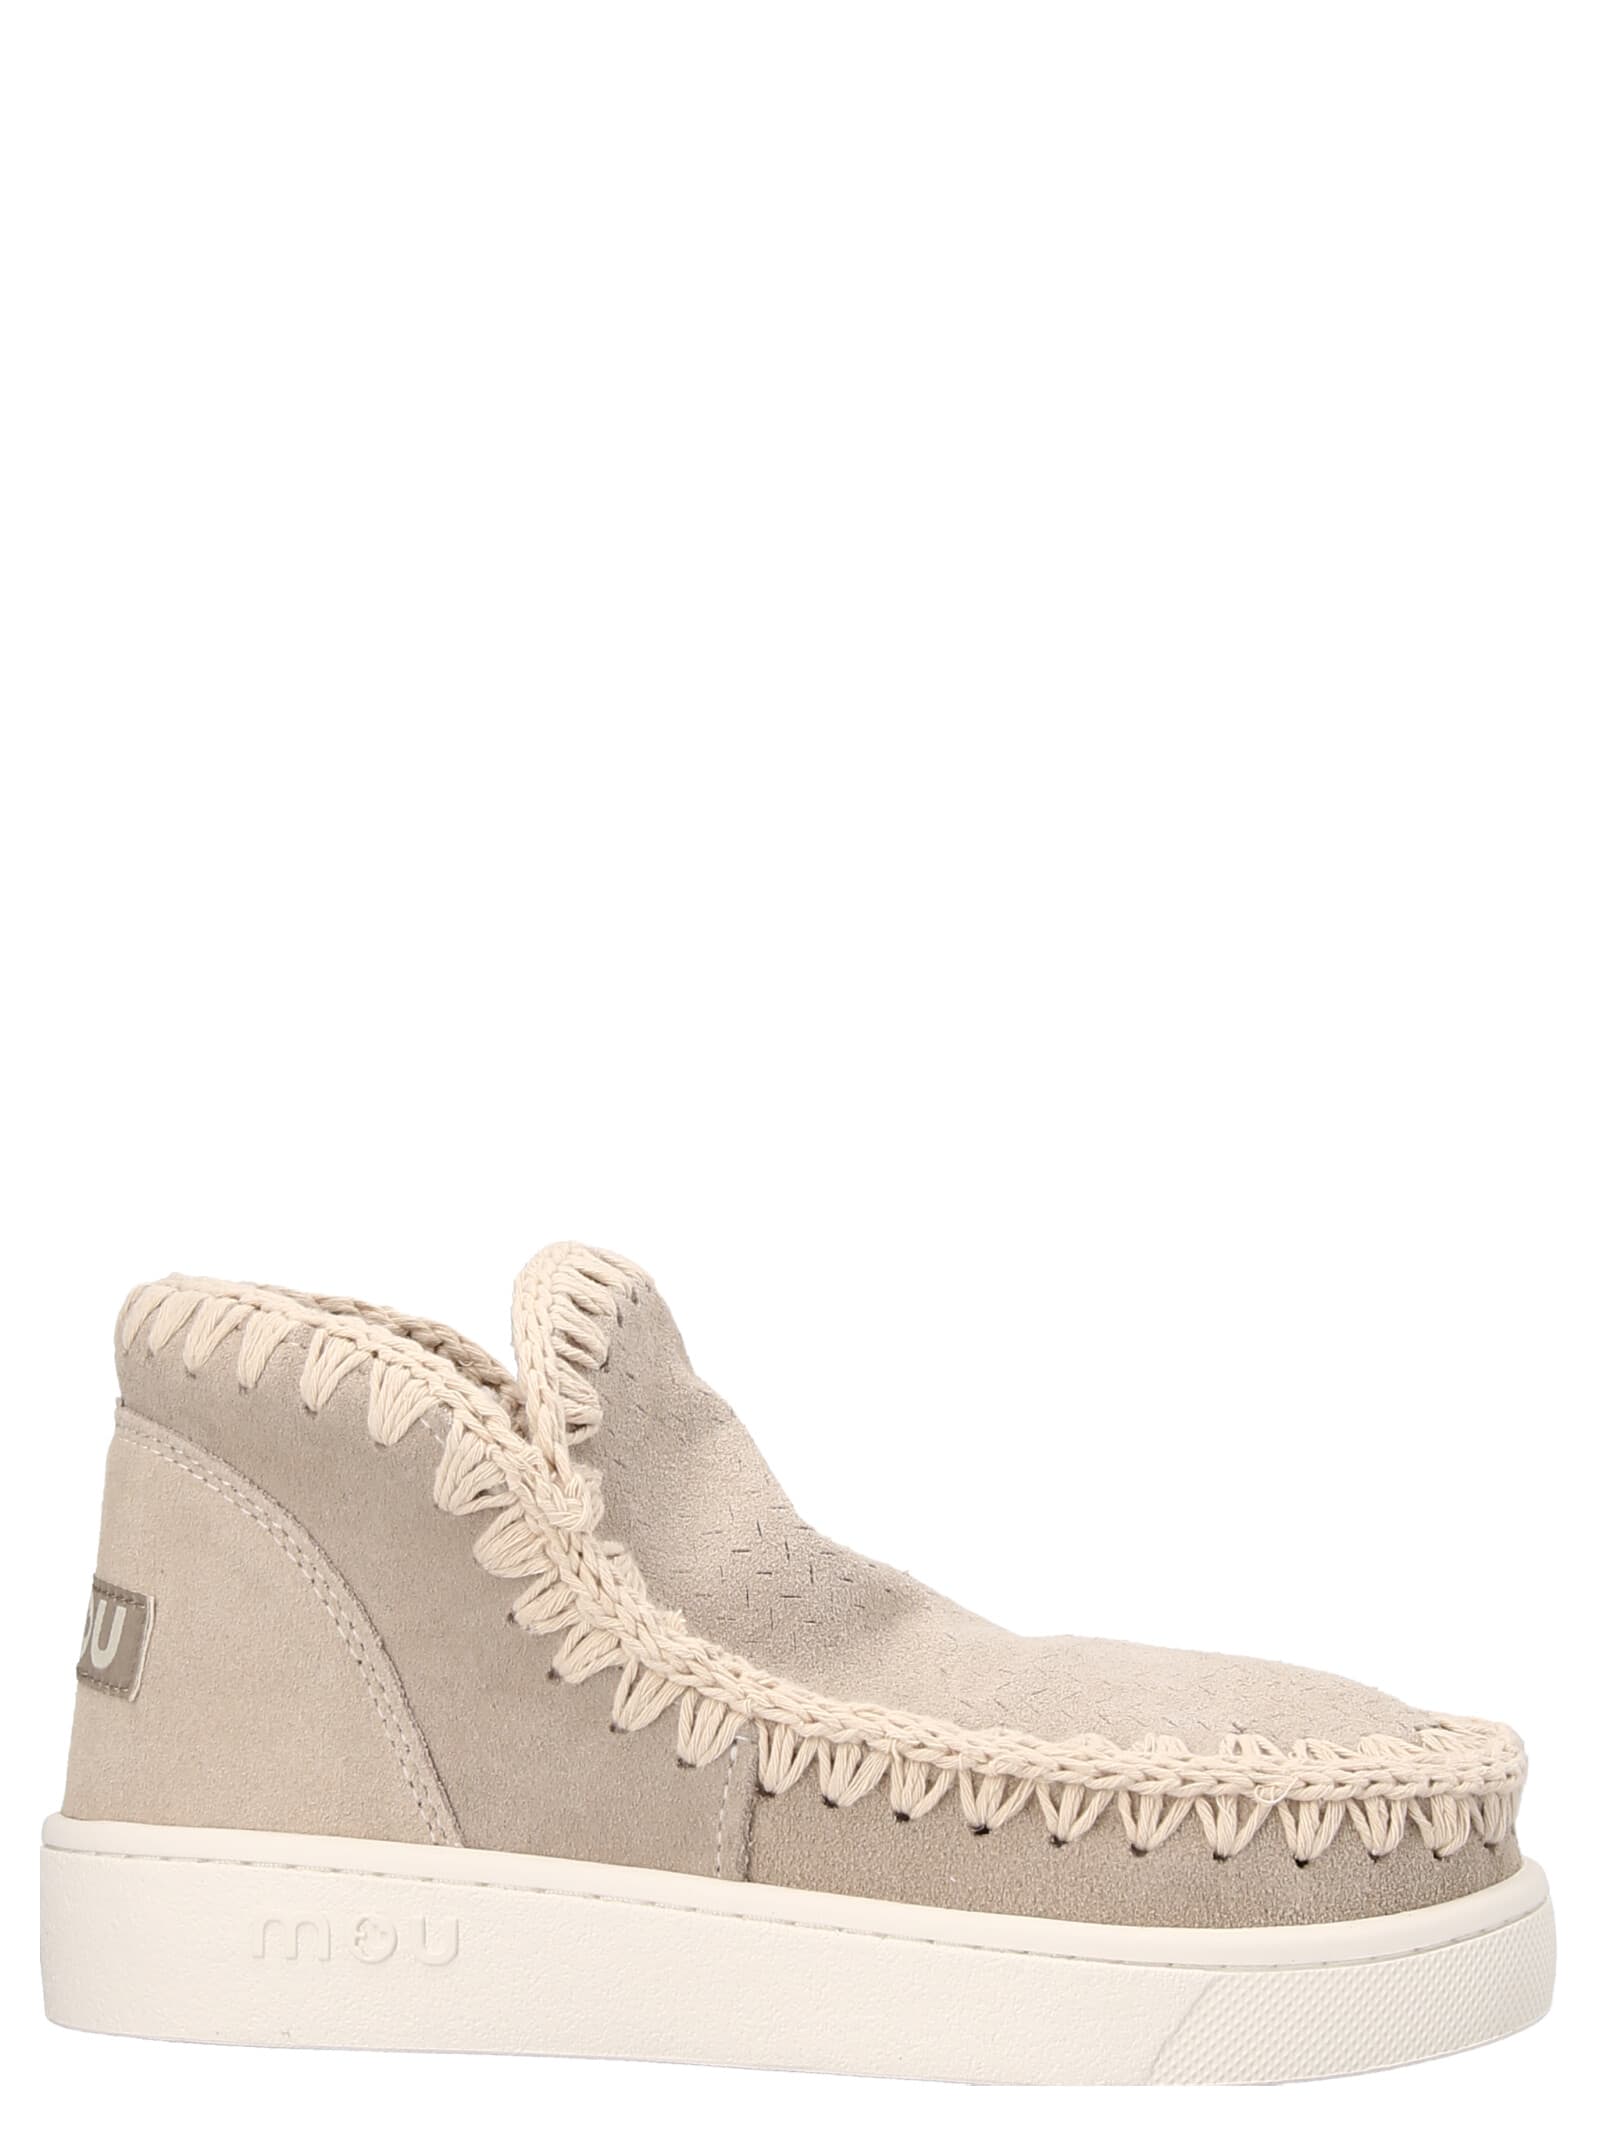 Mou Summer Eskimo Perforated Suede Sneakers In Chlk Chalk White